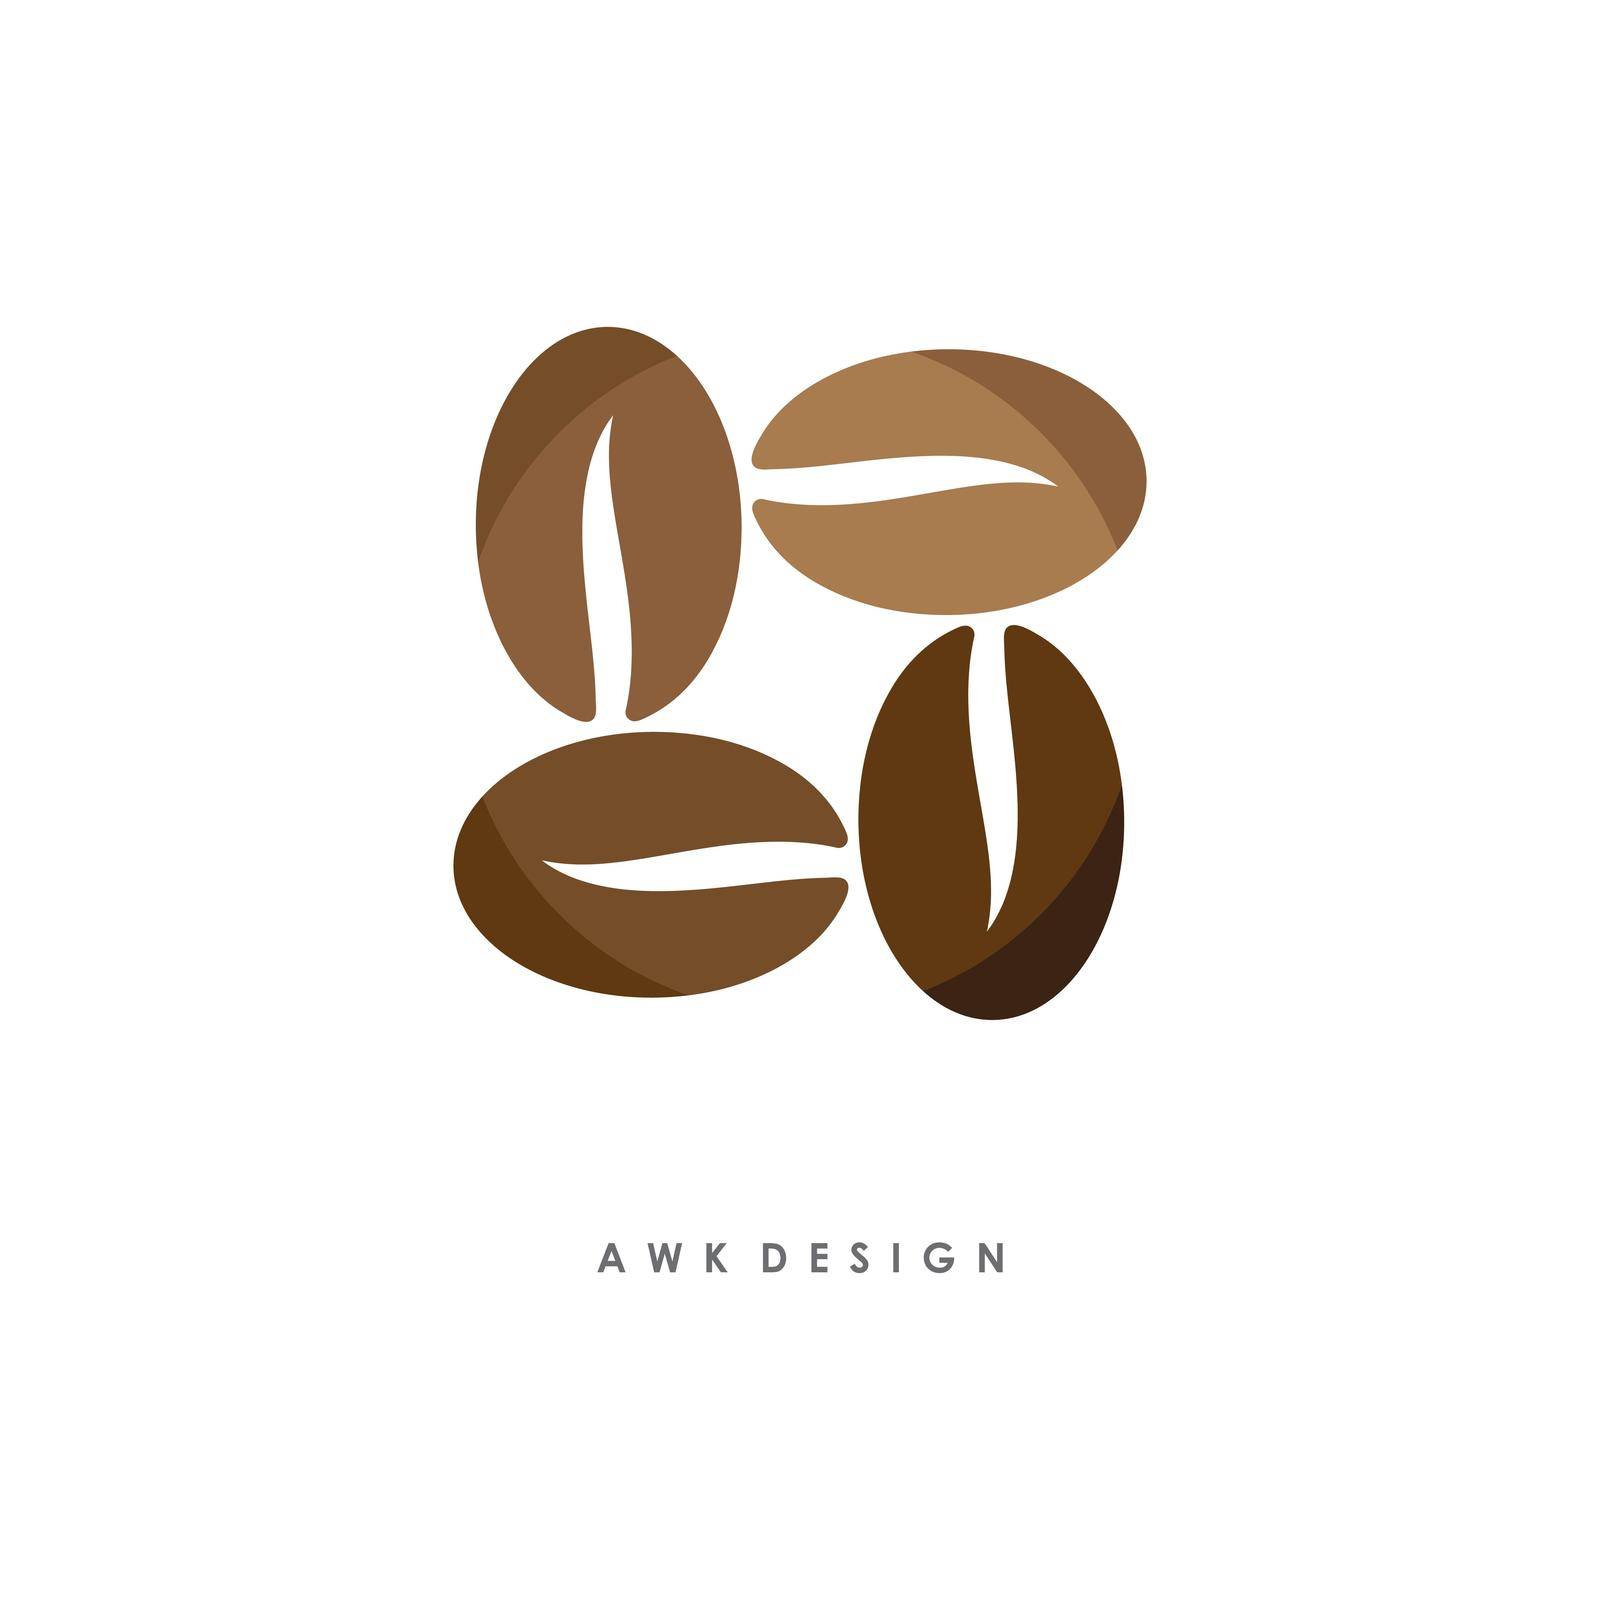 Coffee Beans by awk